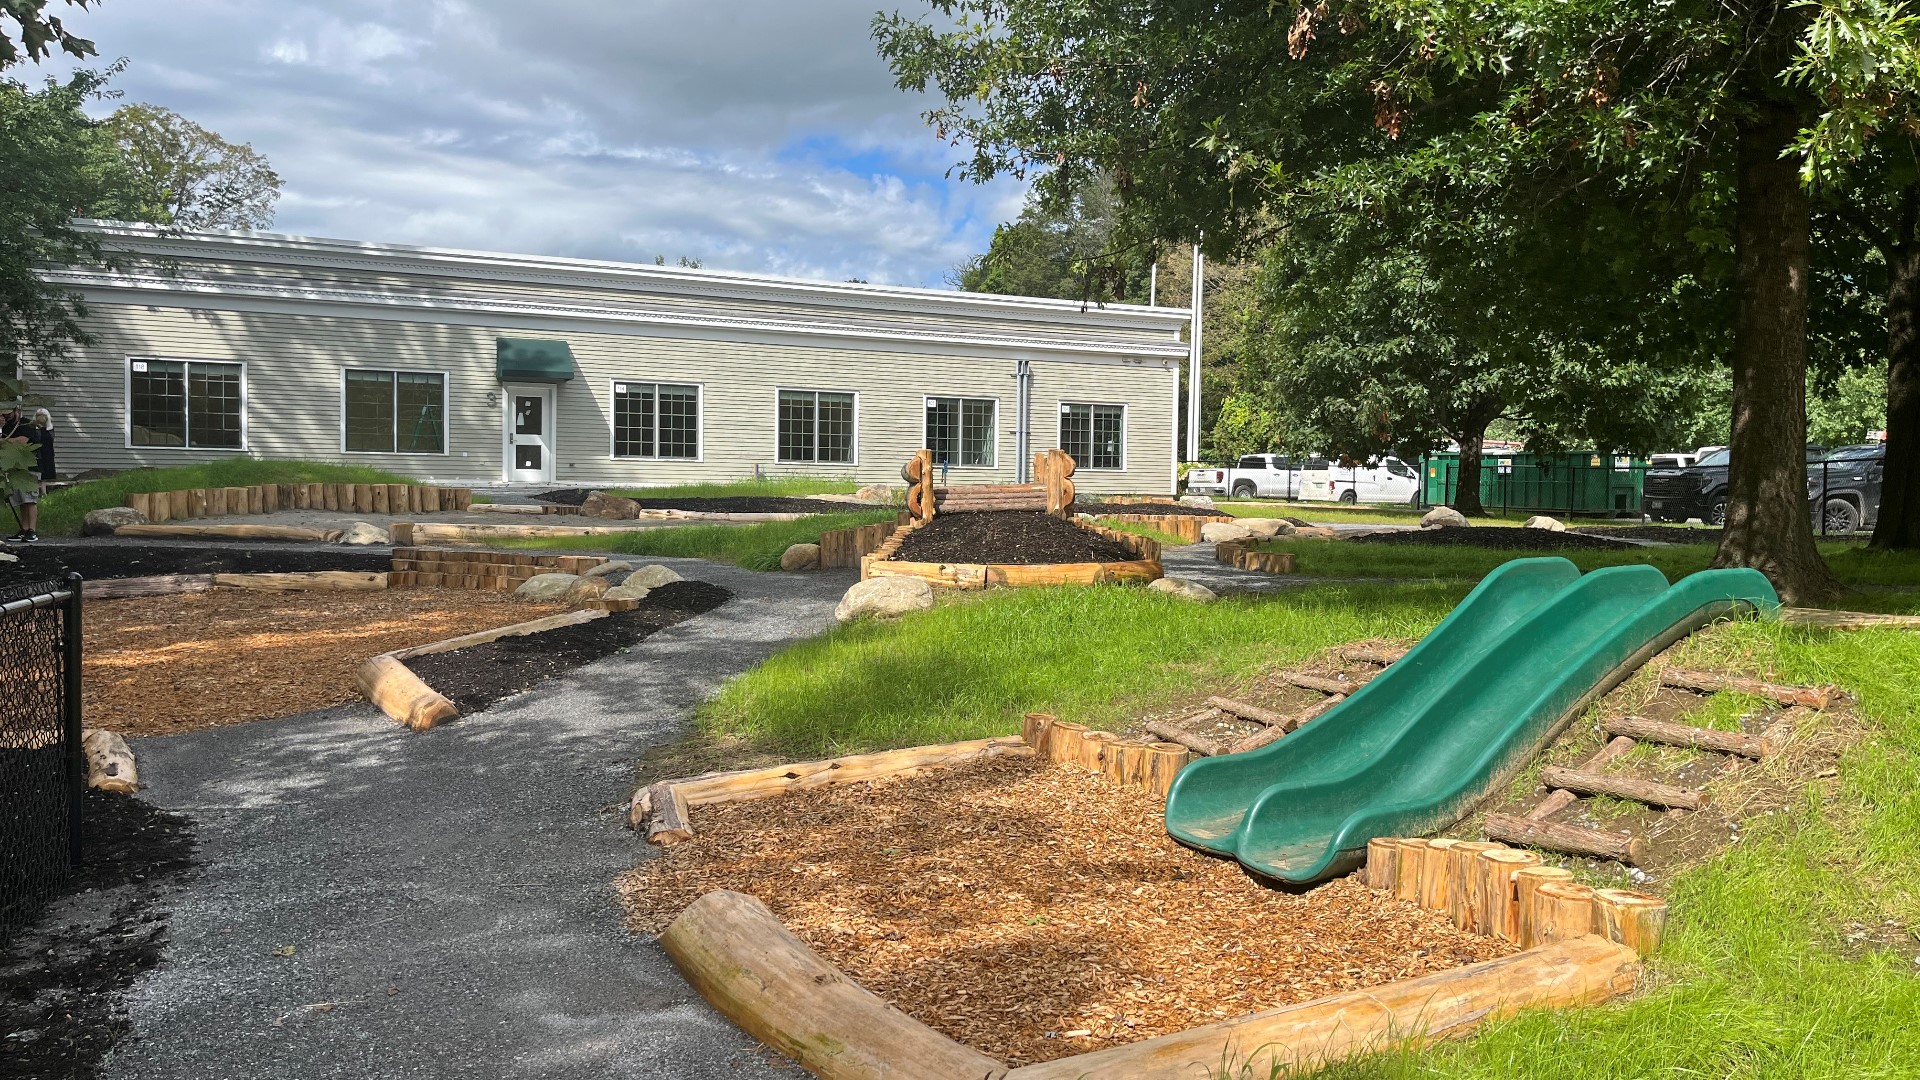 The new center at the University of Maine at Farmington focuses on incorporating nature into the classroom.